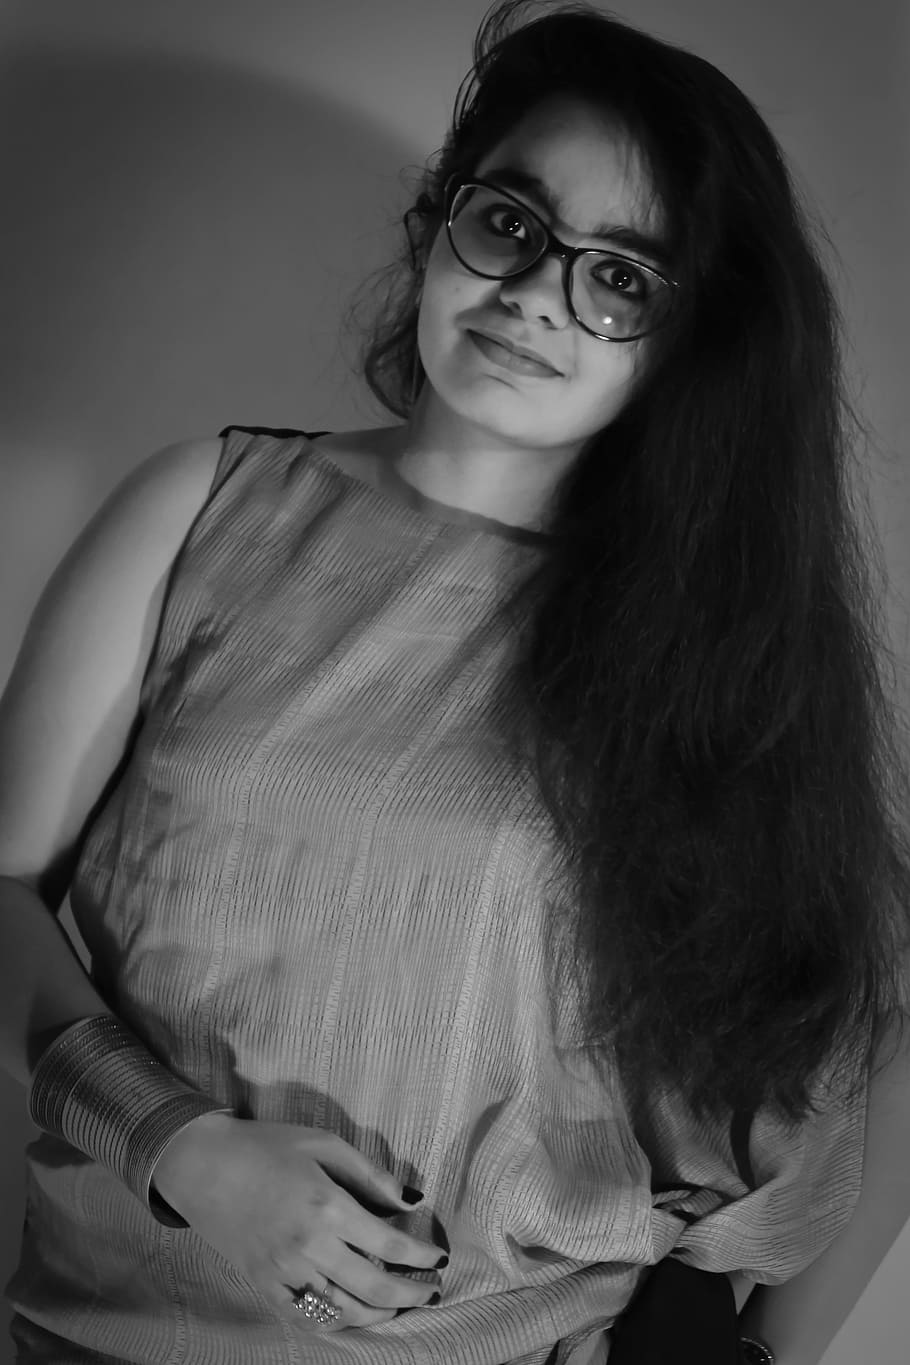 eye, specs, hair, darkroom, looking at camera, portrait, real people, women, smiling, one person